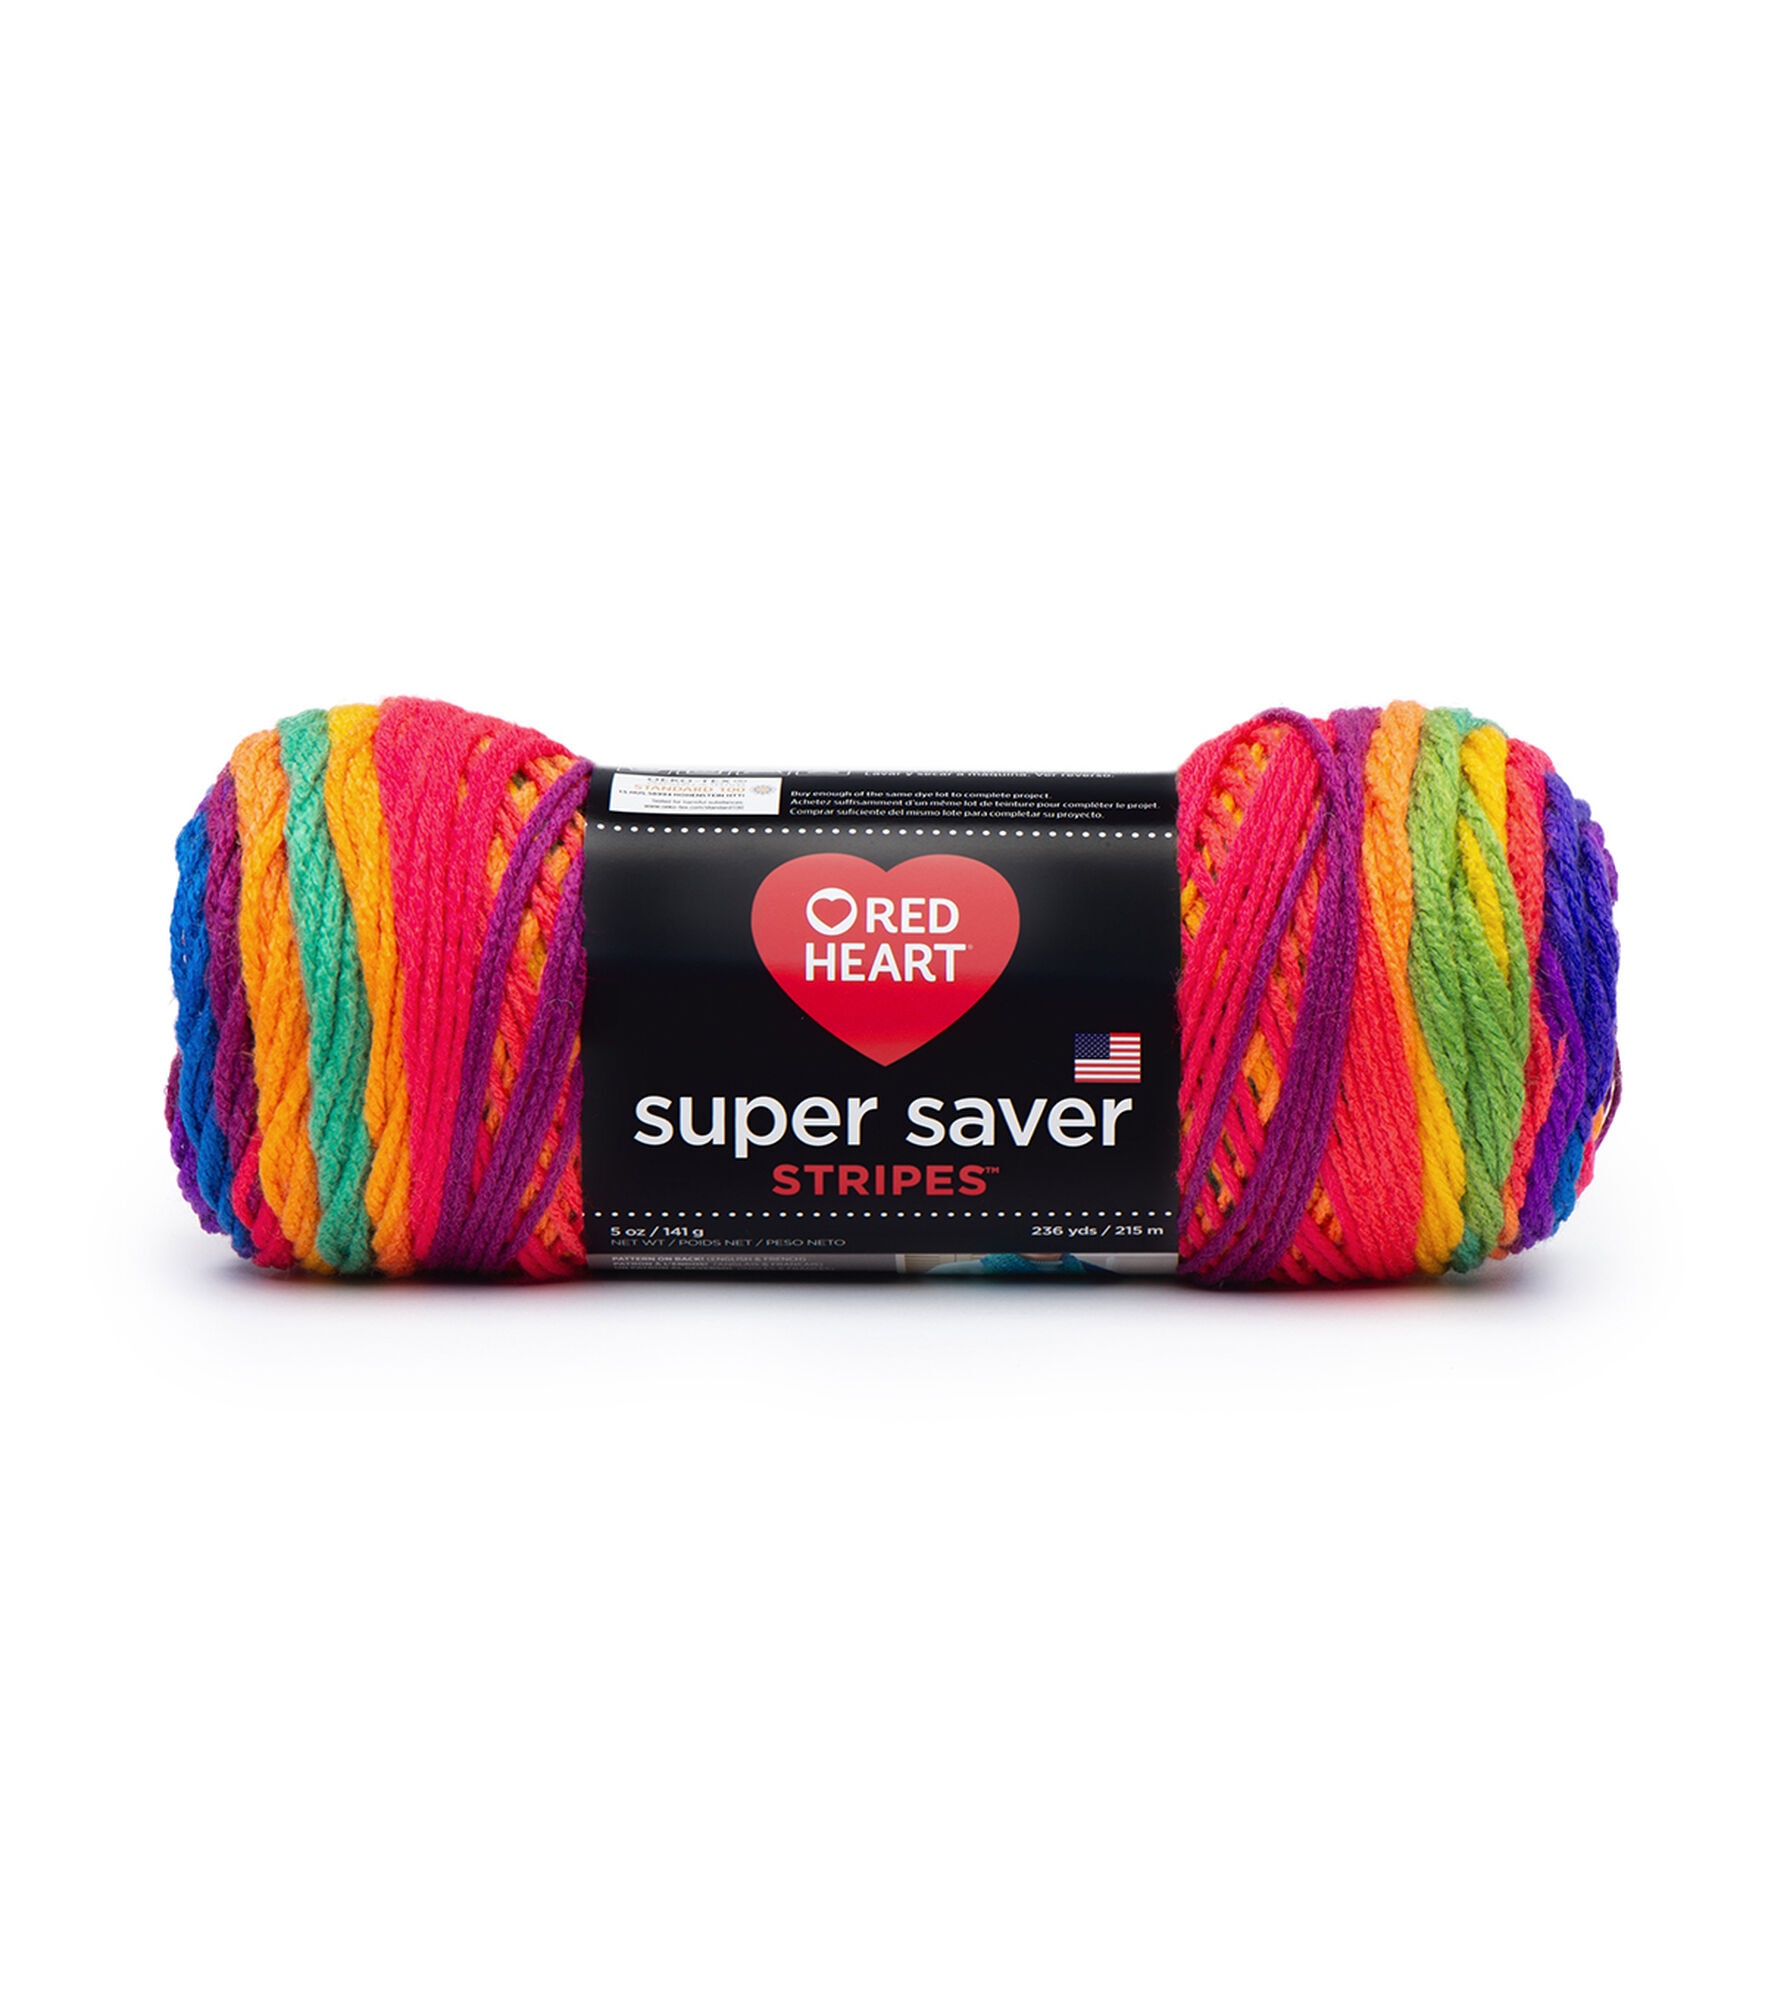 Red Heart Super Saver Yarn, 3 Pack, Artist Print 3 Count